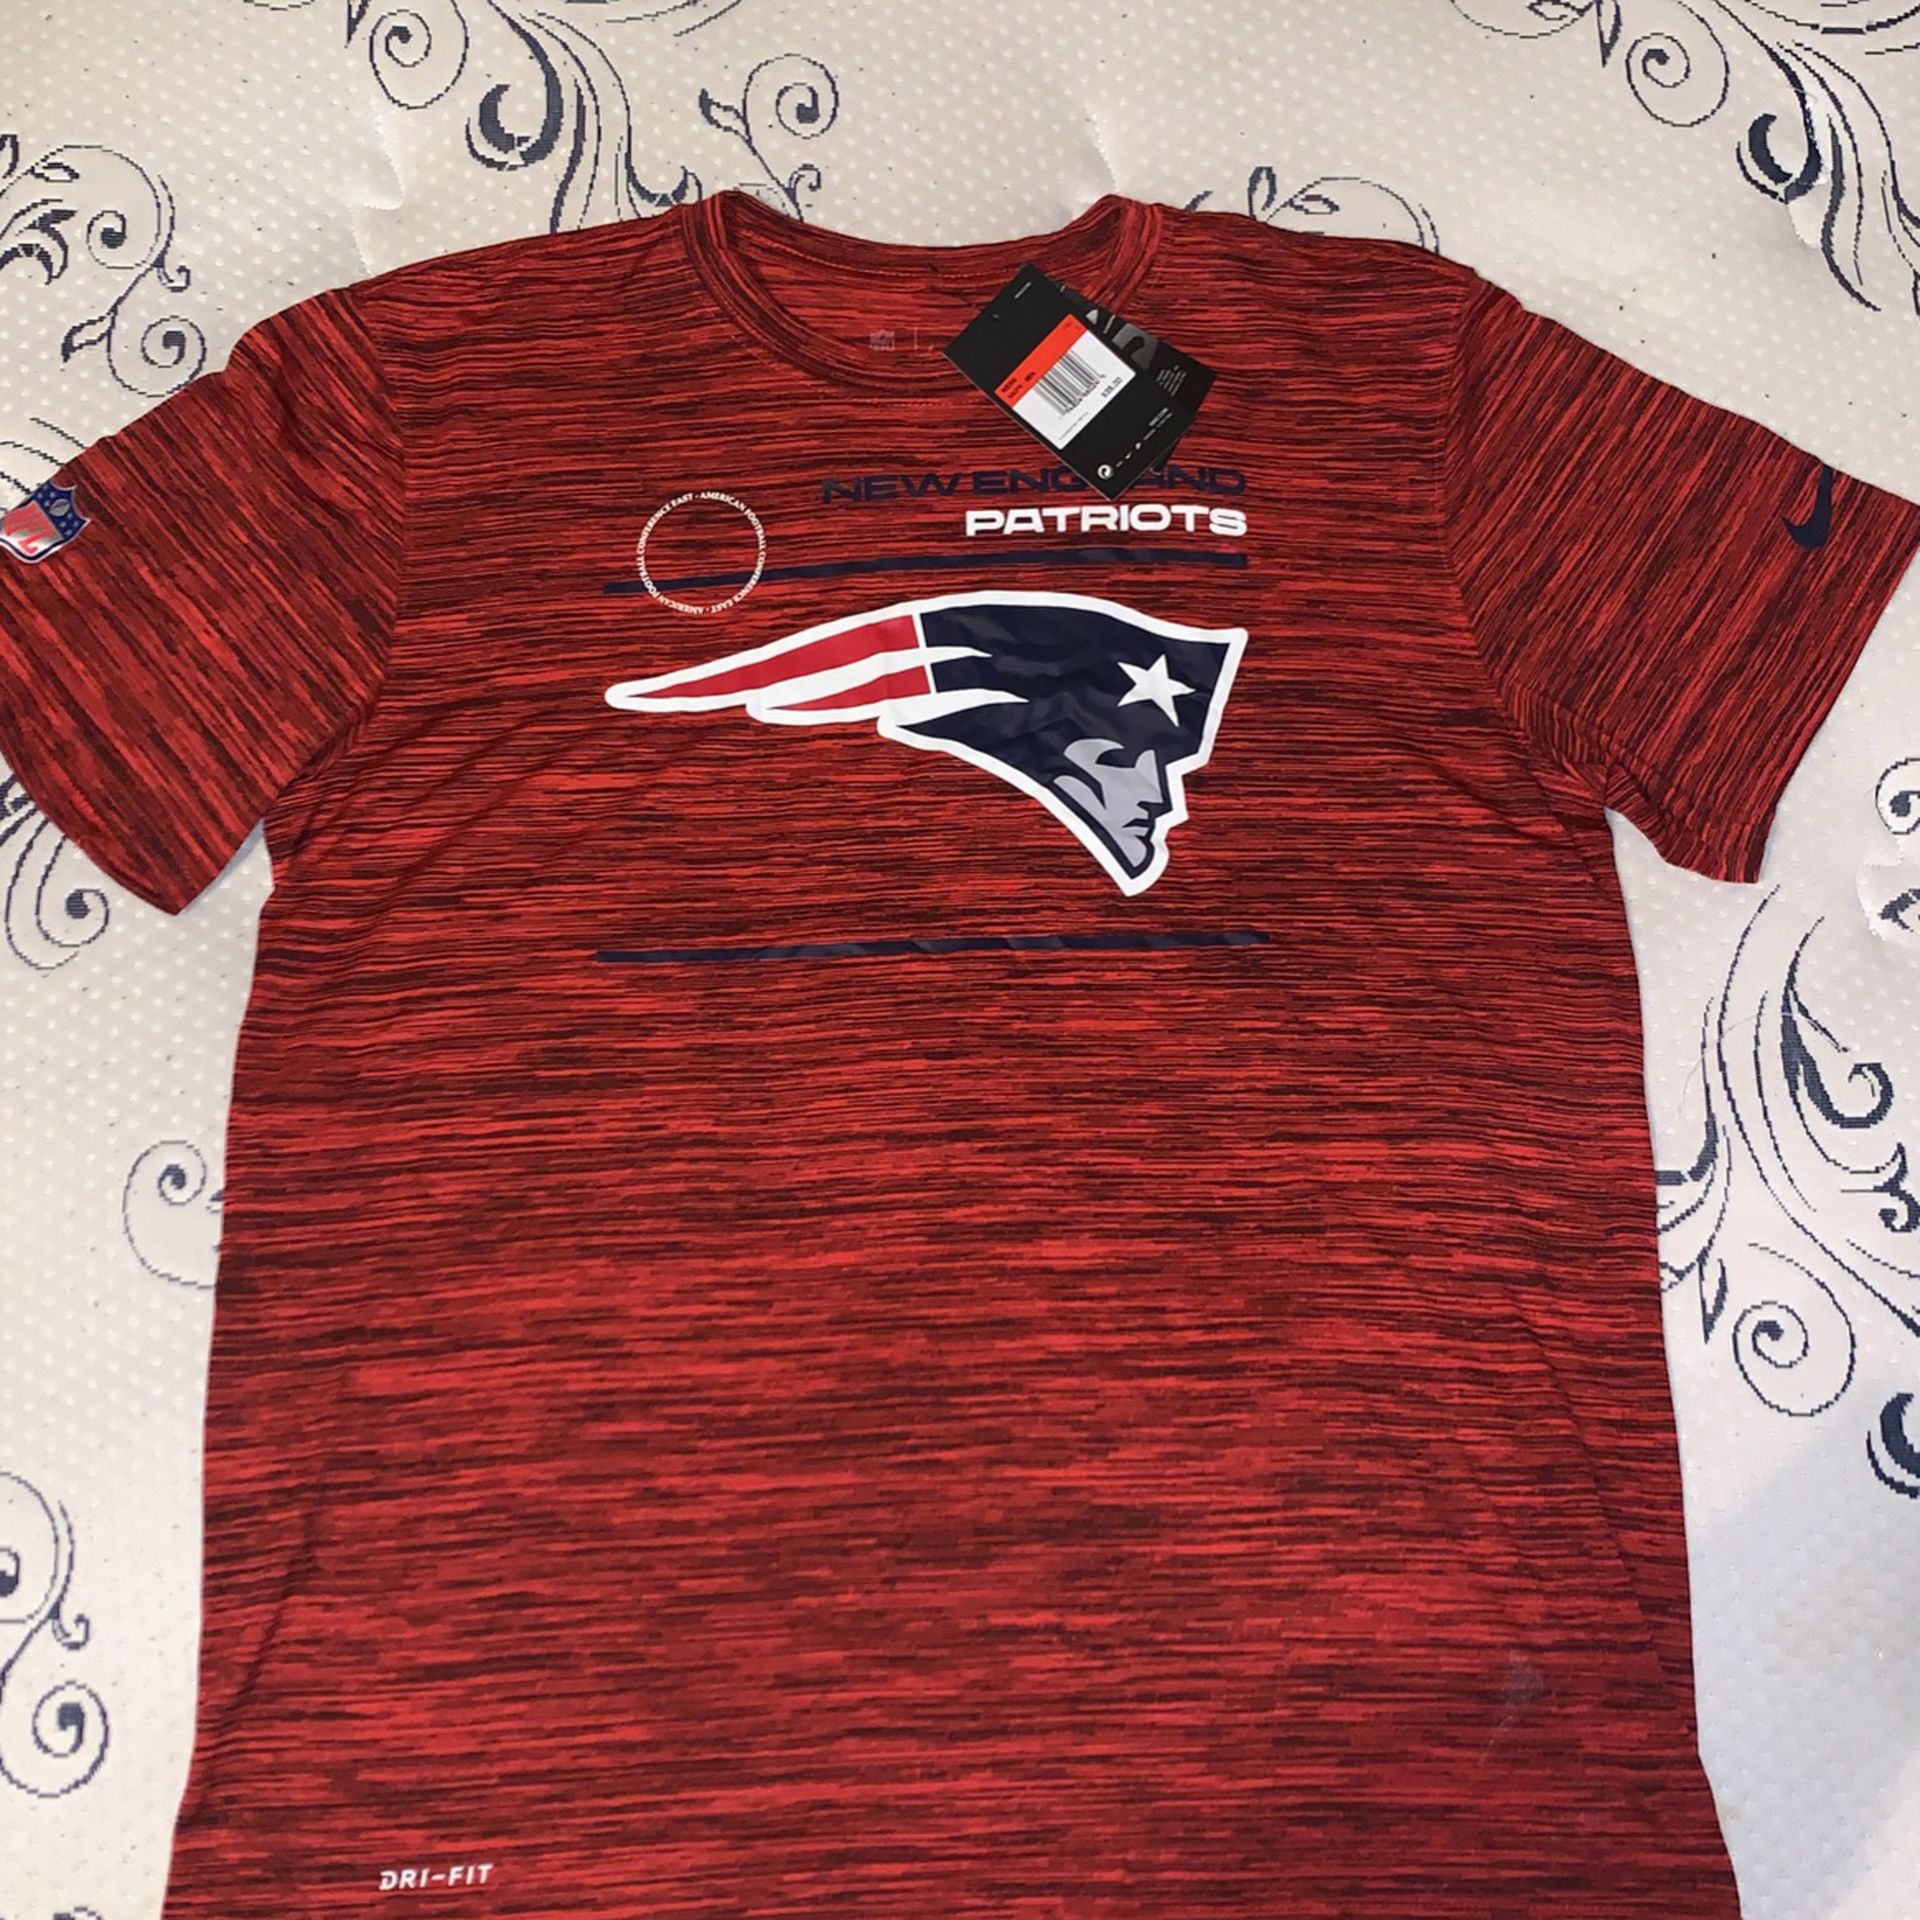 Patriots Tee Shirt New Never Used